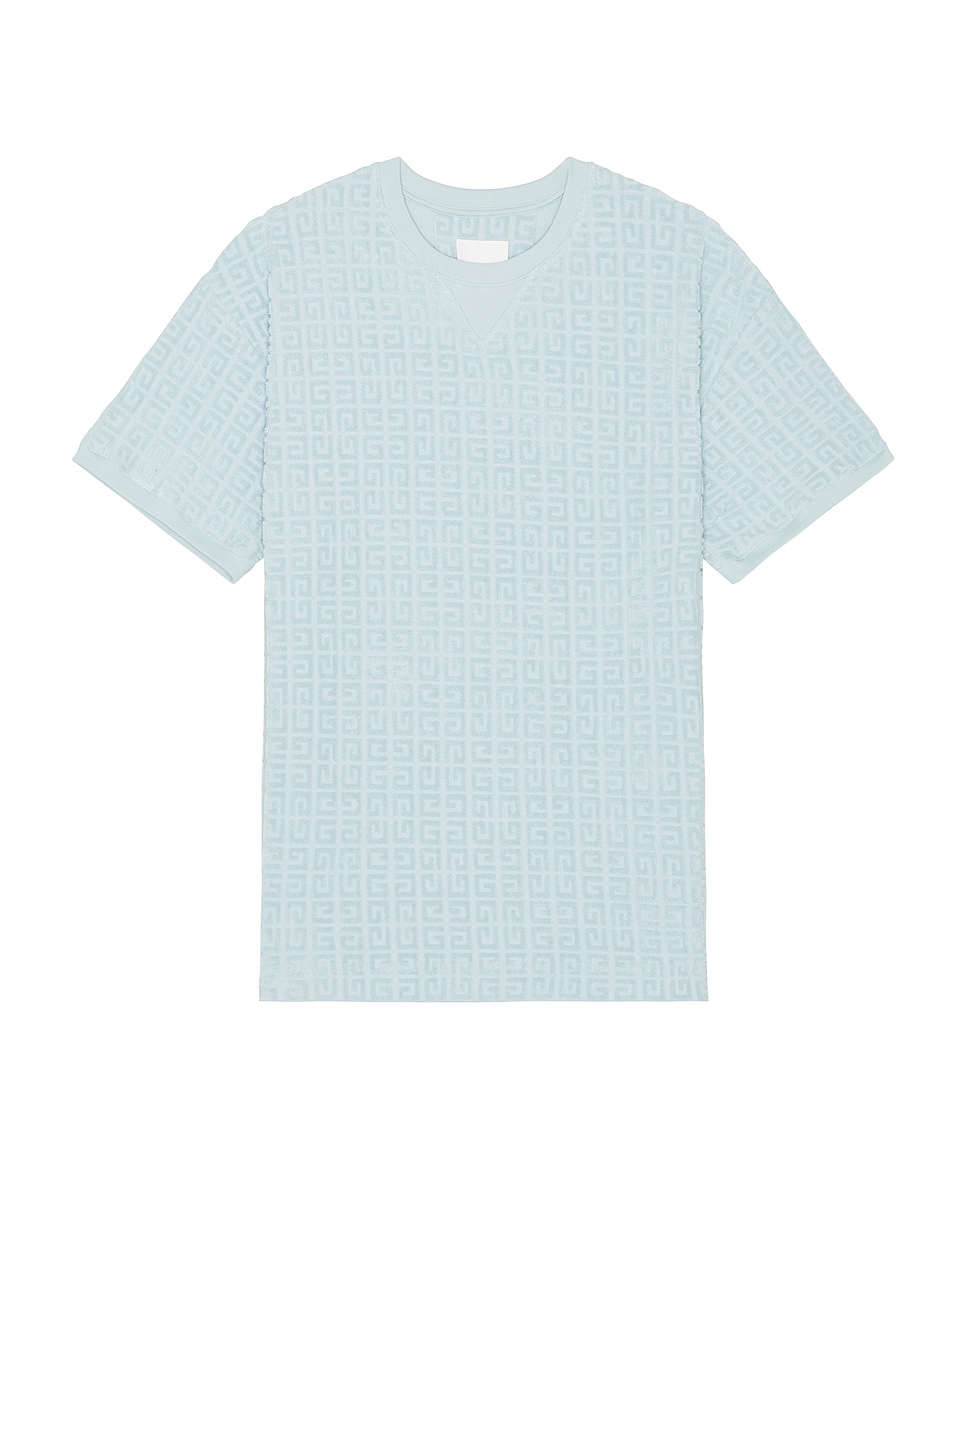 Image 1 of Givenchy Standard Short Sleeve Base T-Shirt in Sky Blue